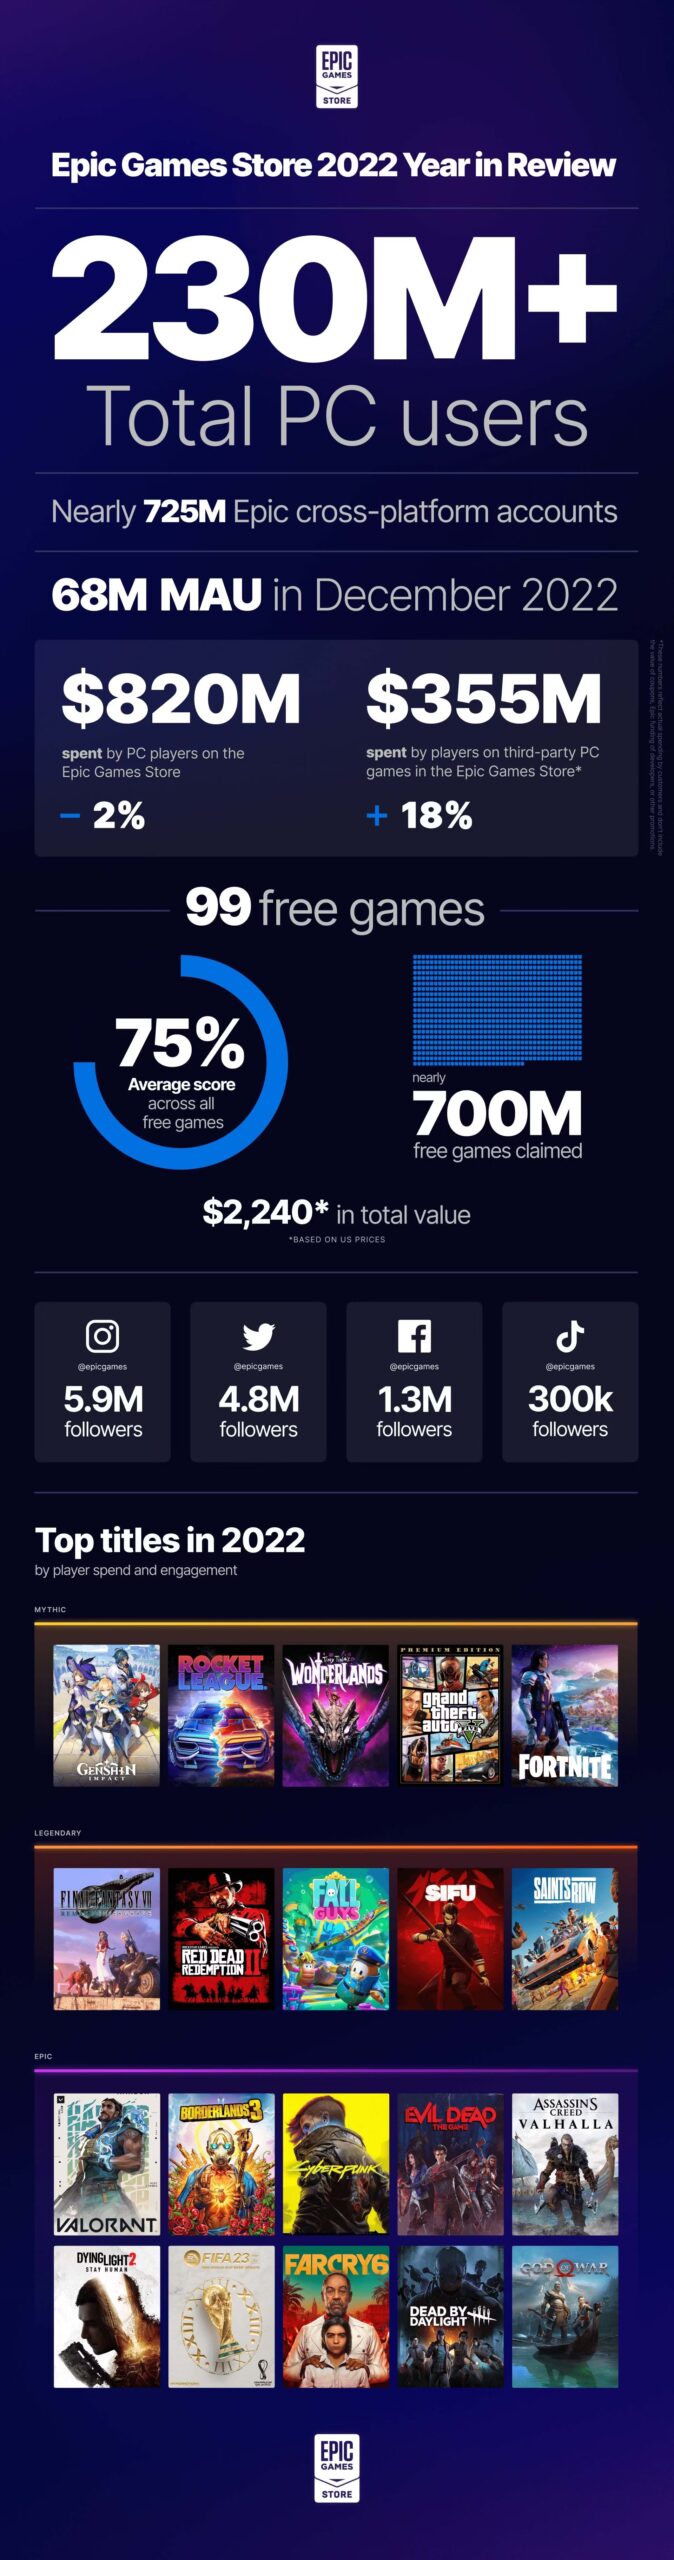 epic games store 2022 year in review data infographic 1920x7288 1 scaled